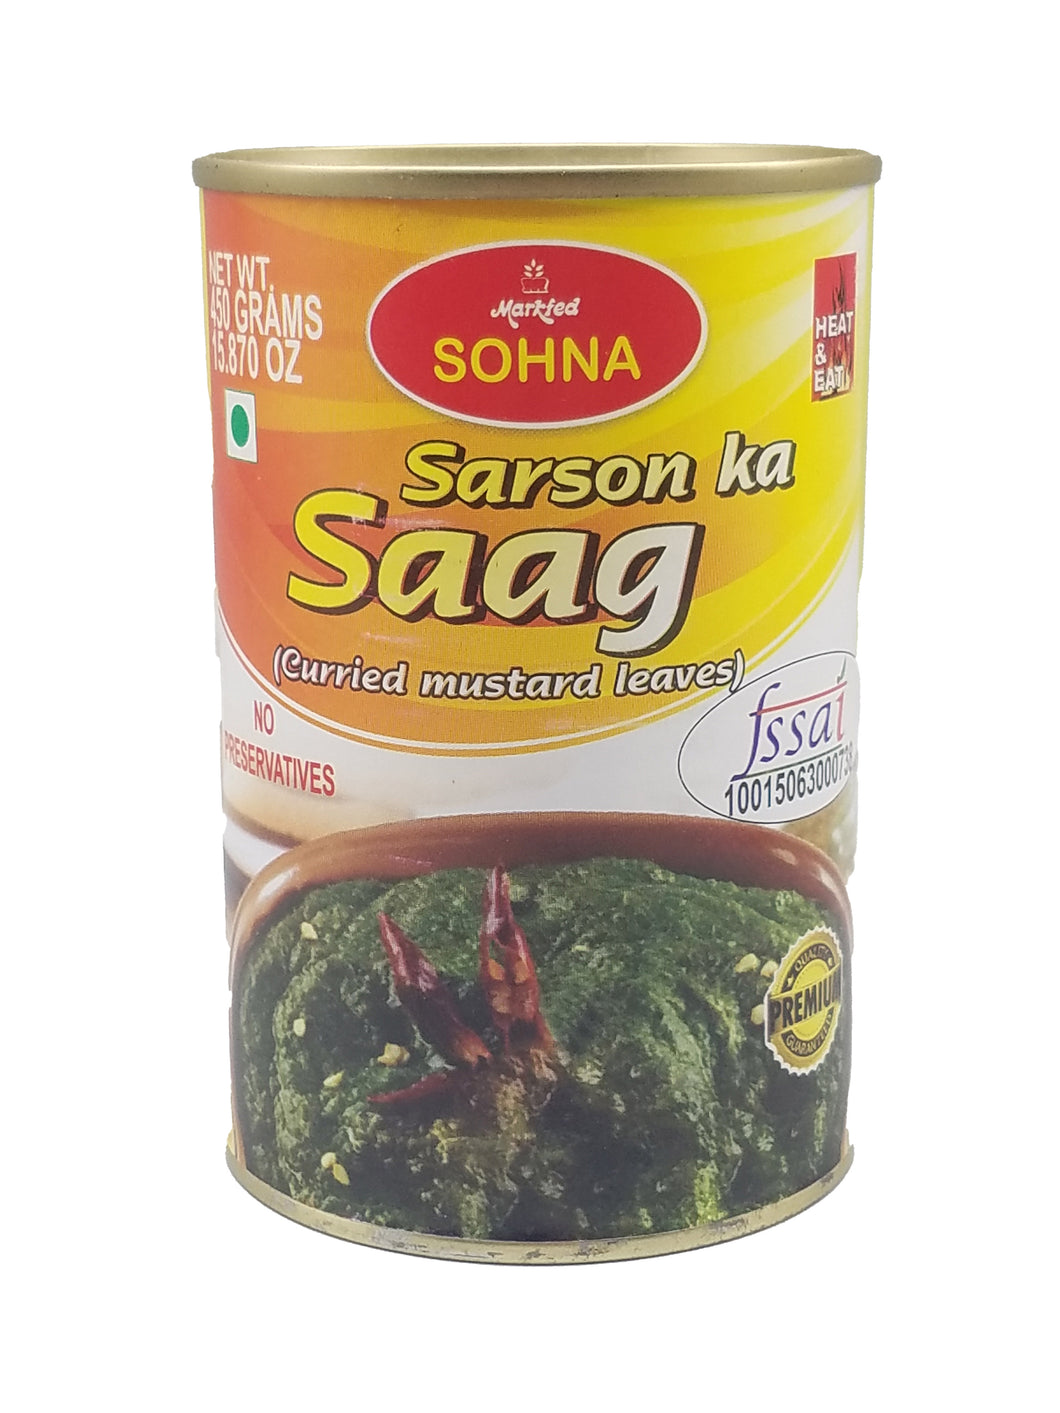 Sohna Curried Mustard Leaves